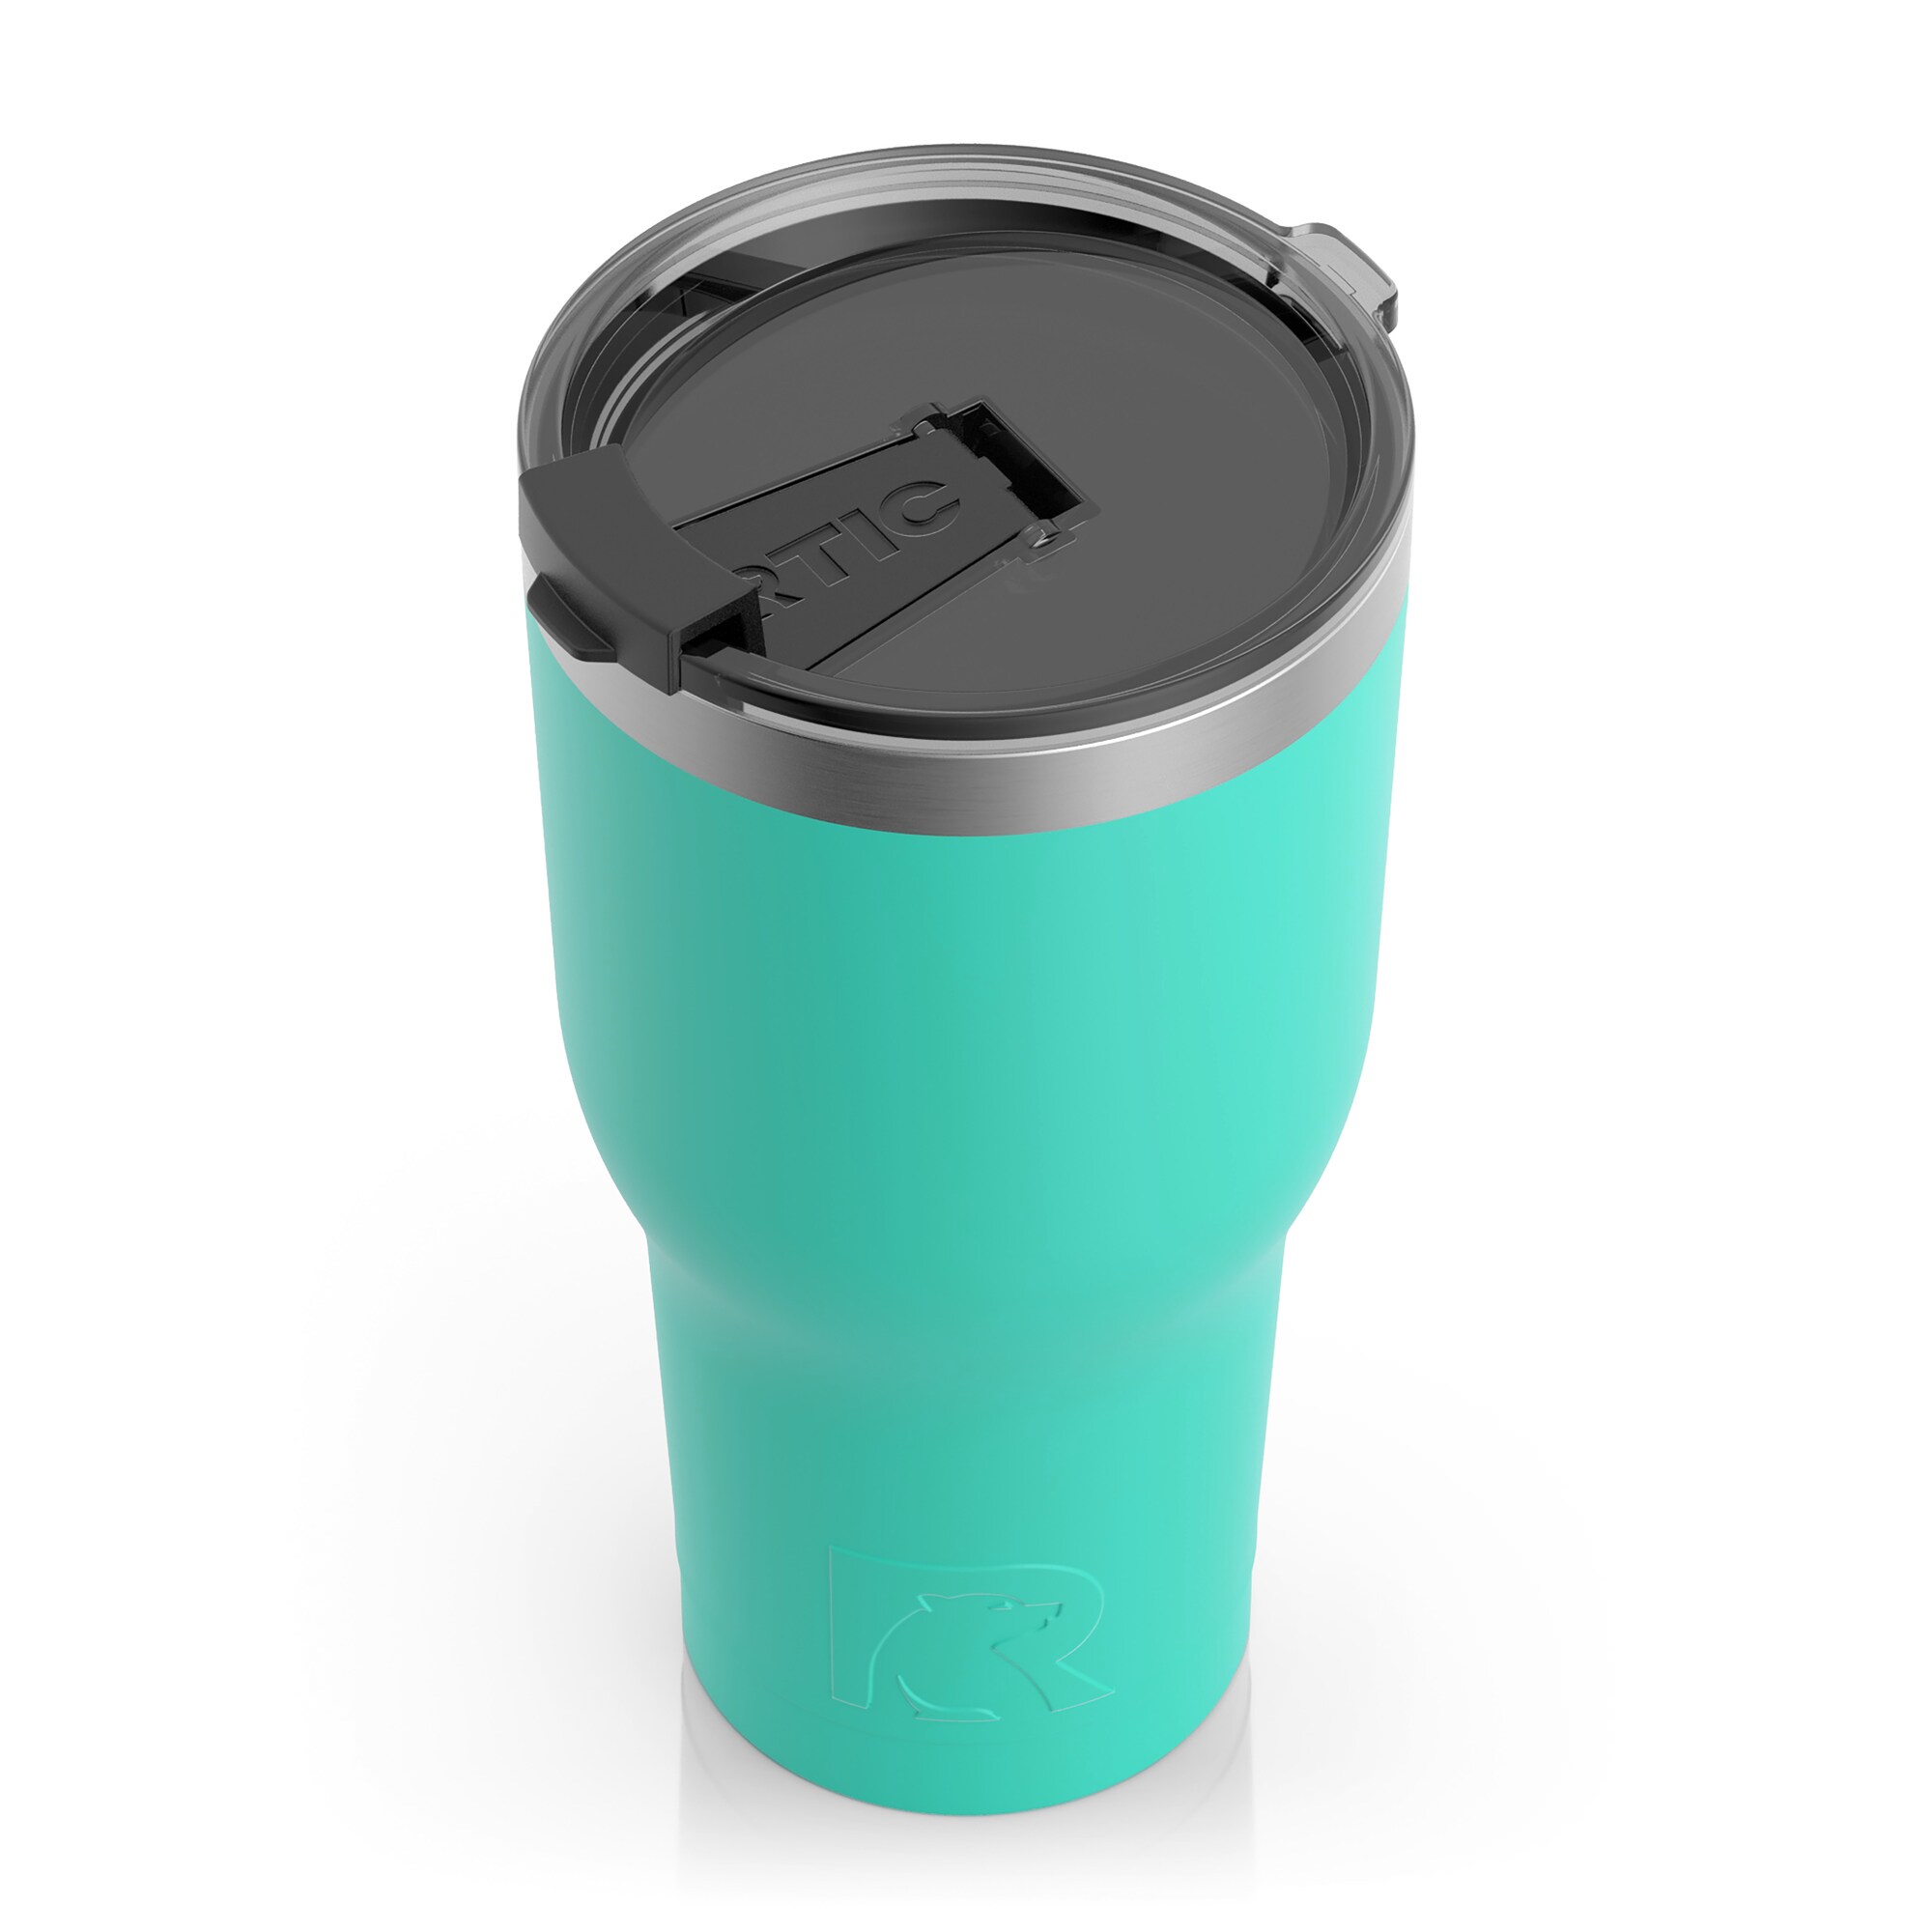  RTIC Plastic Handle for 30oz Cup Design RTIC 30 oz. Tumbler:  Home & Kitchen